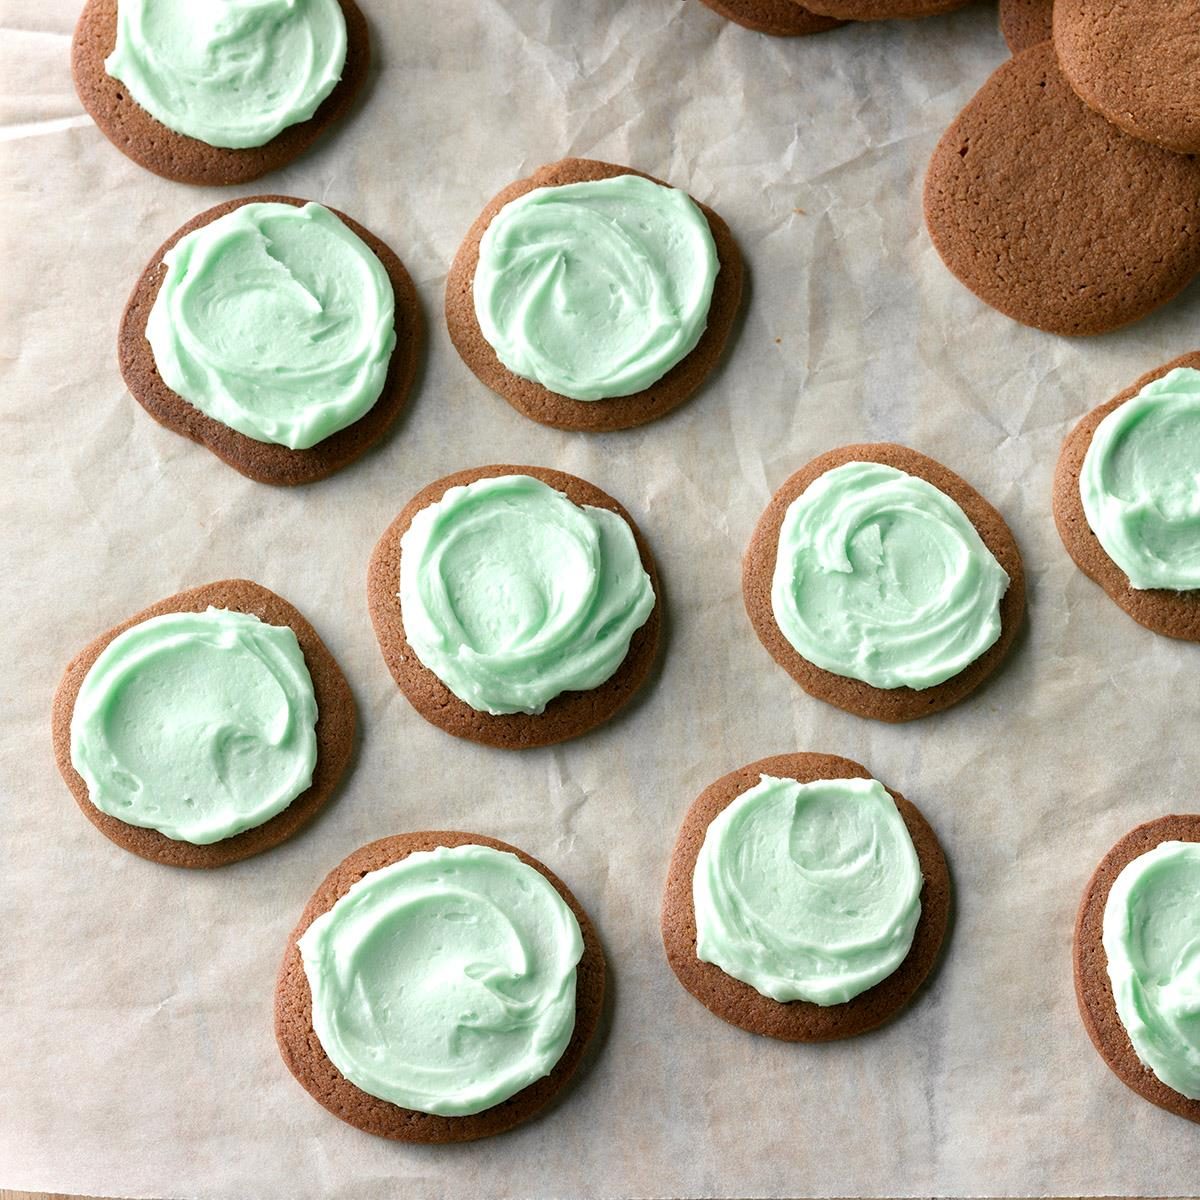 Chocolate Mint Creams Recipe: How to Make It